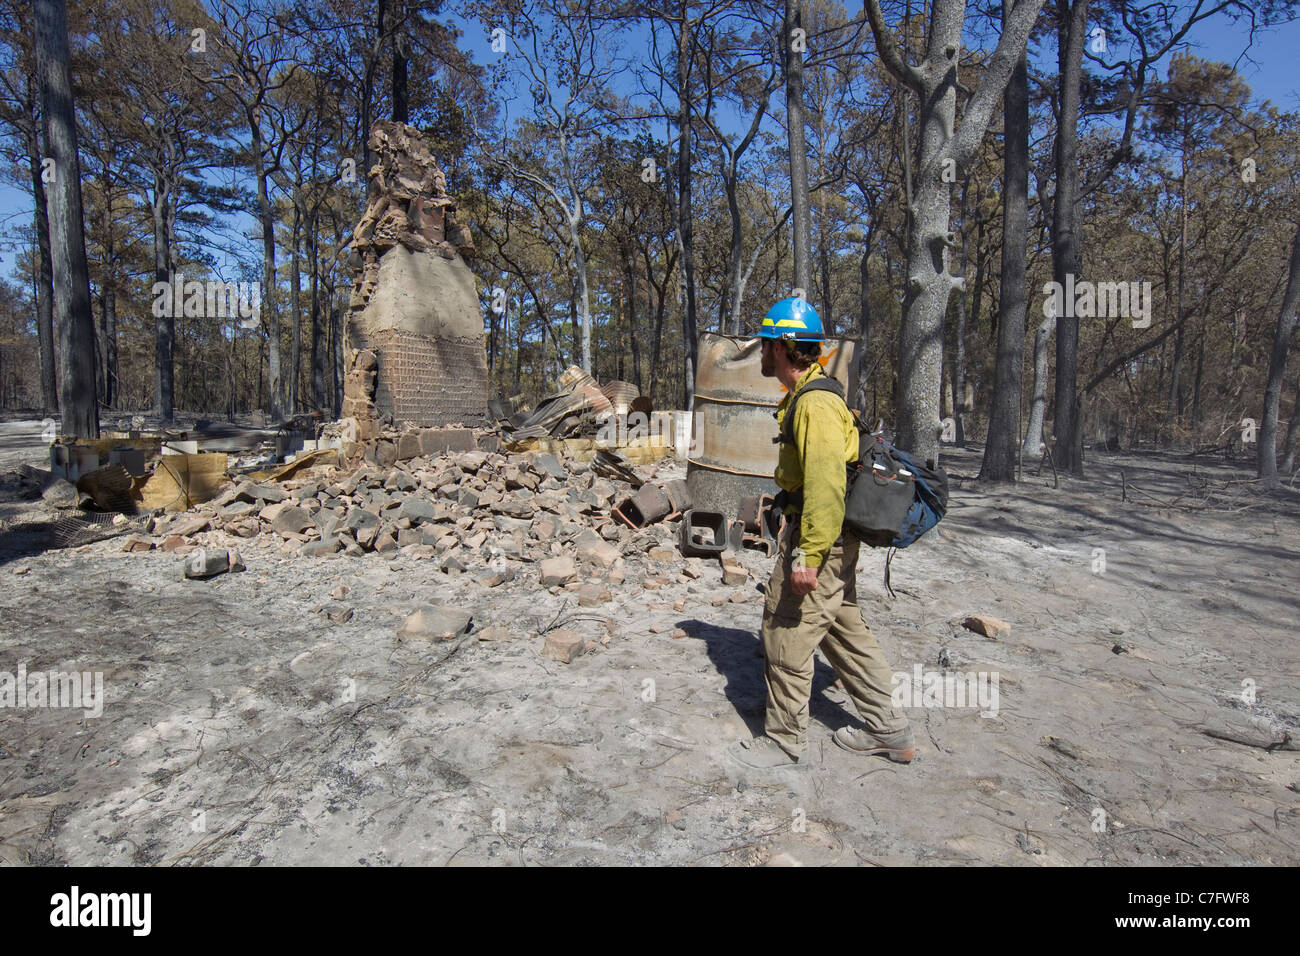 Firefighter wearing safety gear looks for hot spots in heavily forested residential area hit by wildfire near Bastrop Texas Stock Photo